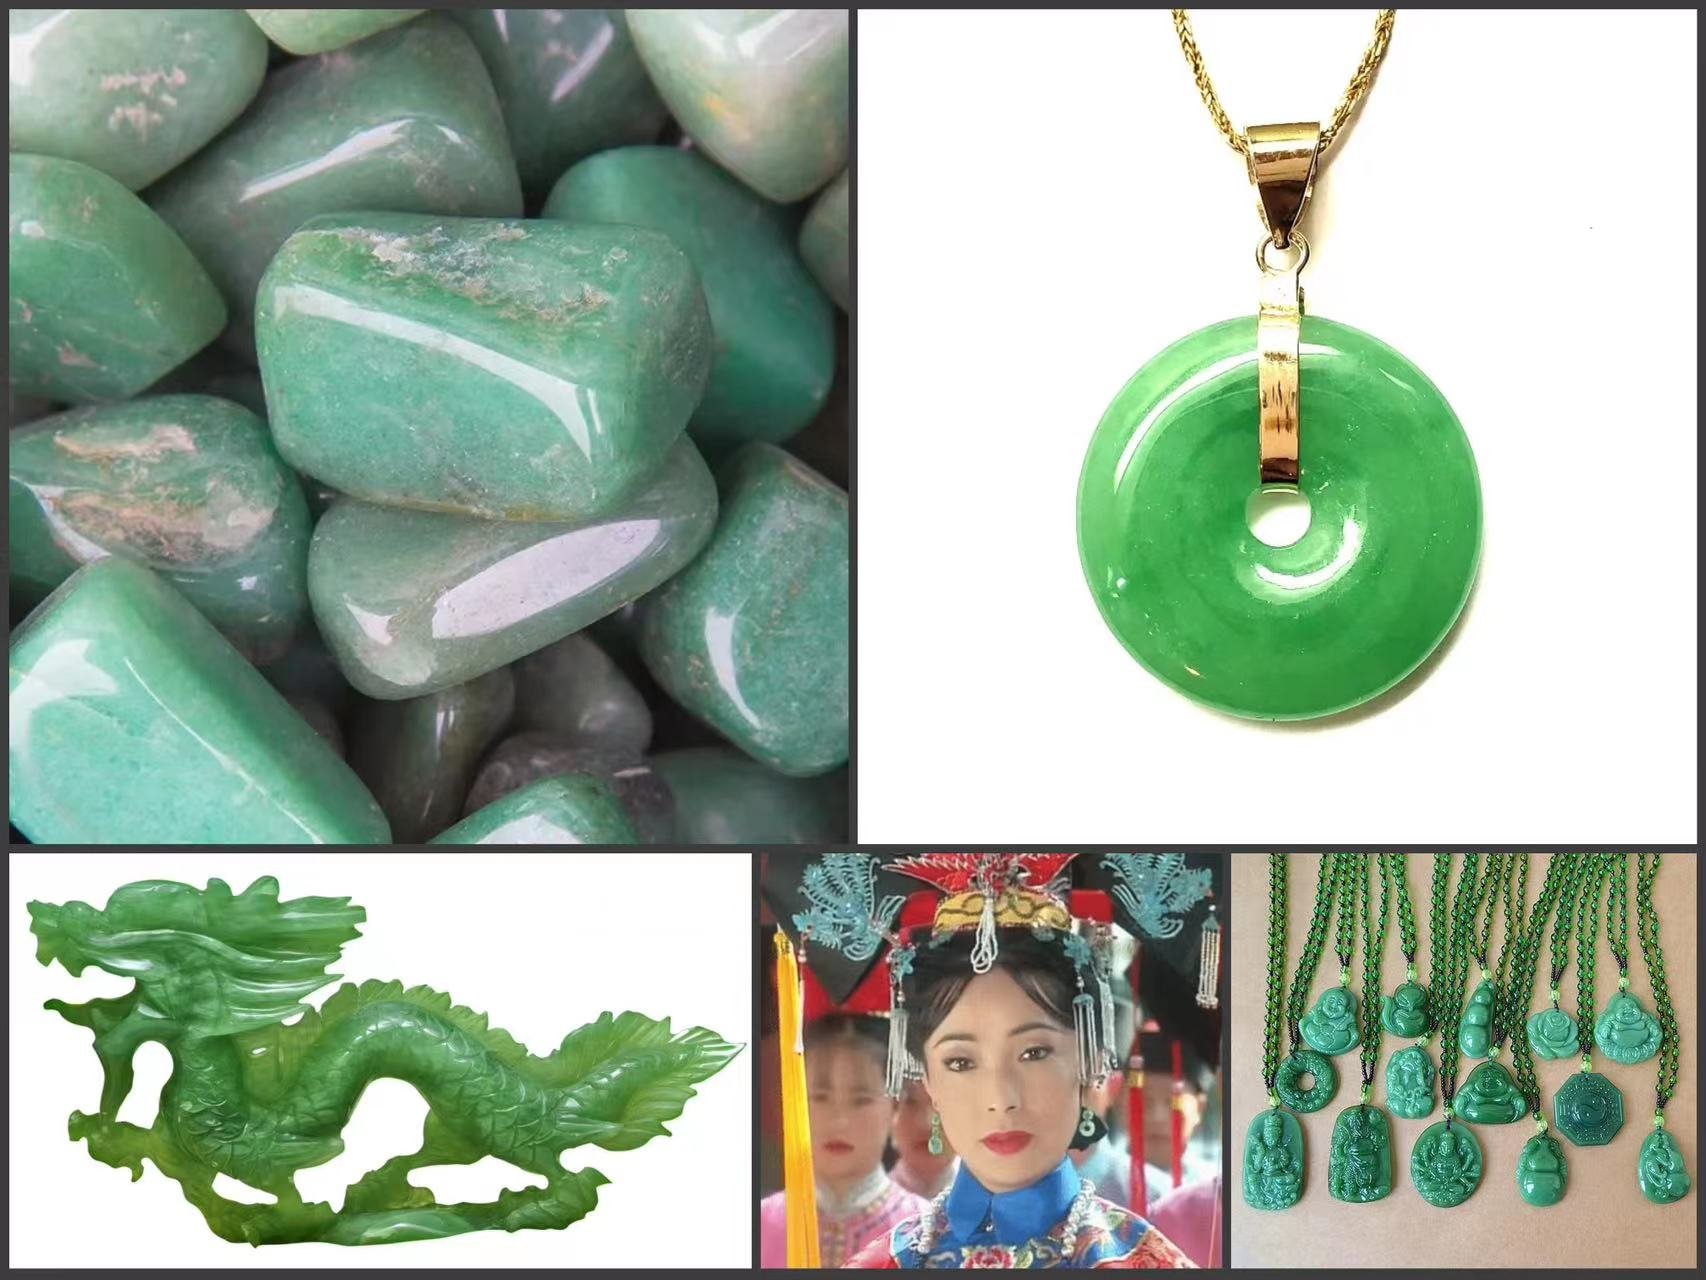 Christina Chao: Jade is a good example of the fact that the value of gems can be very subjective, and very regional.